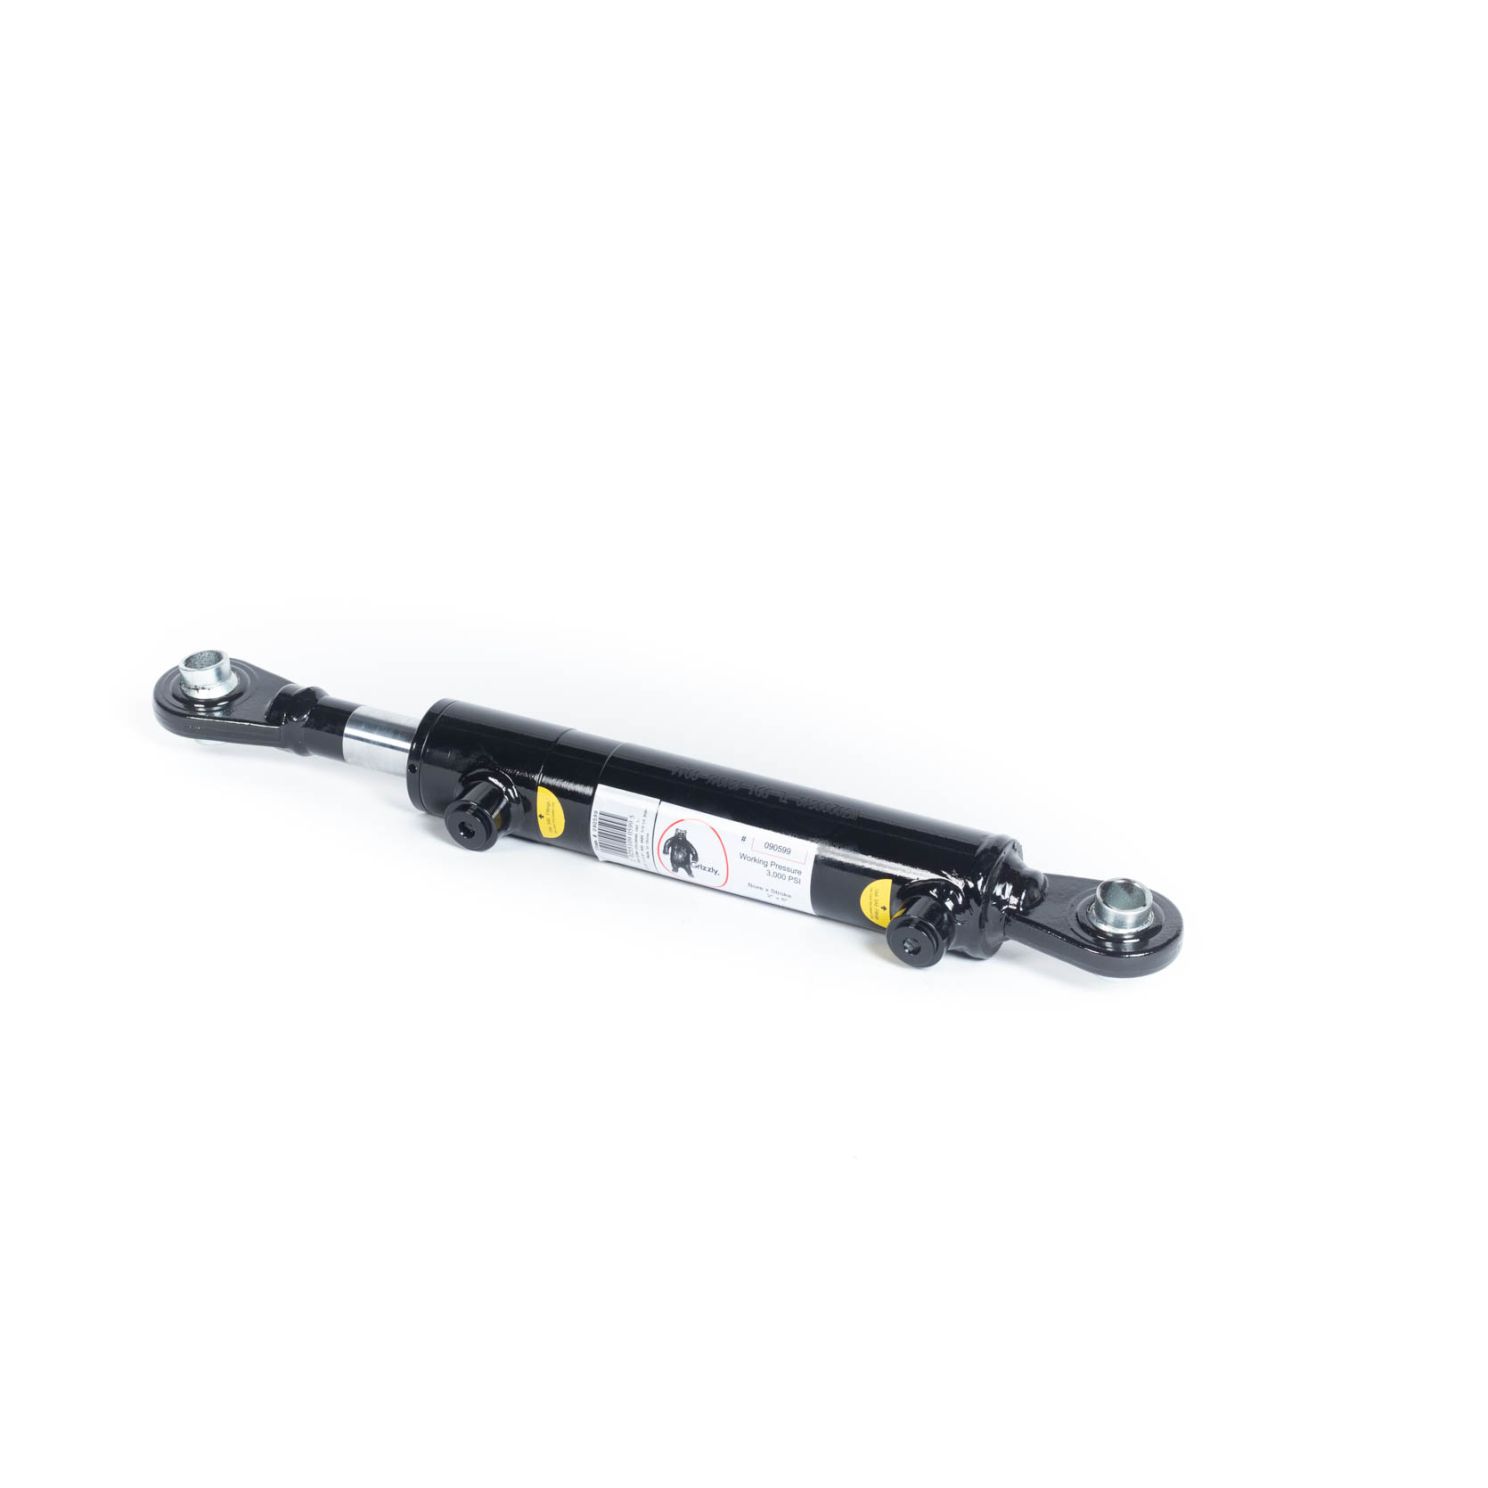 Grizzly Category 1 Tractor Top Link Hydraulic Cylinder 90599